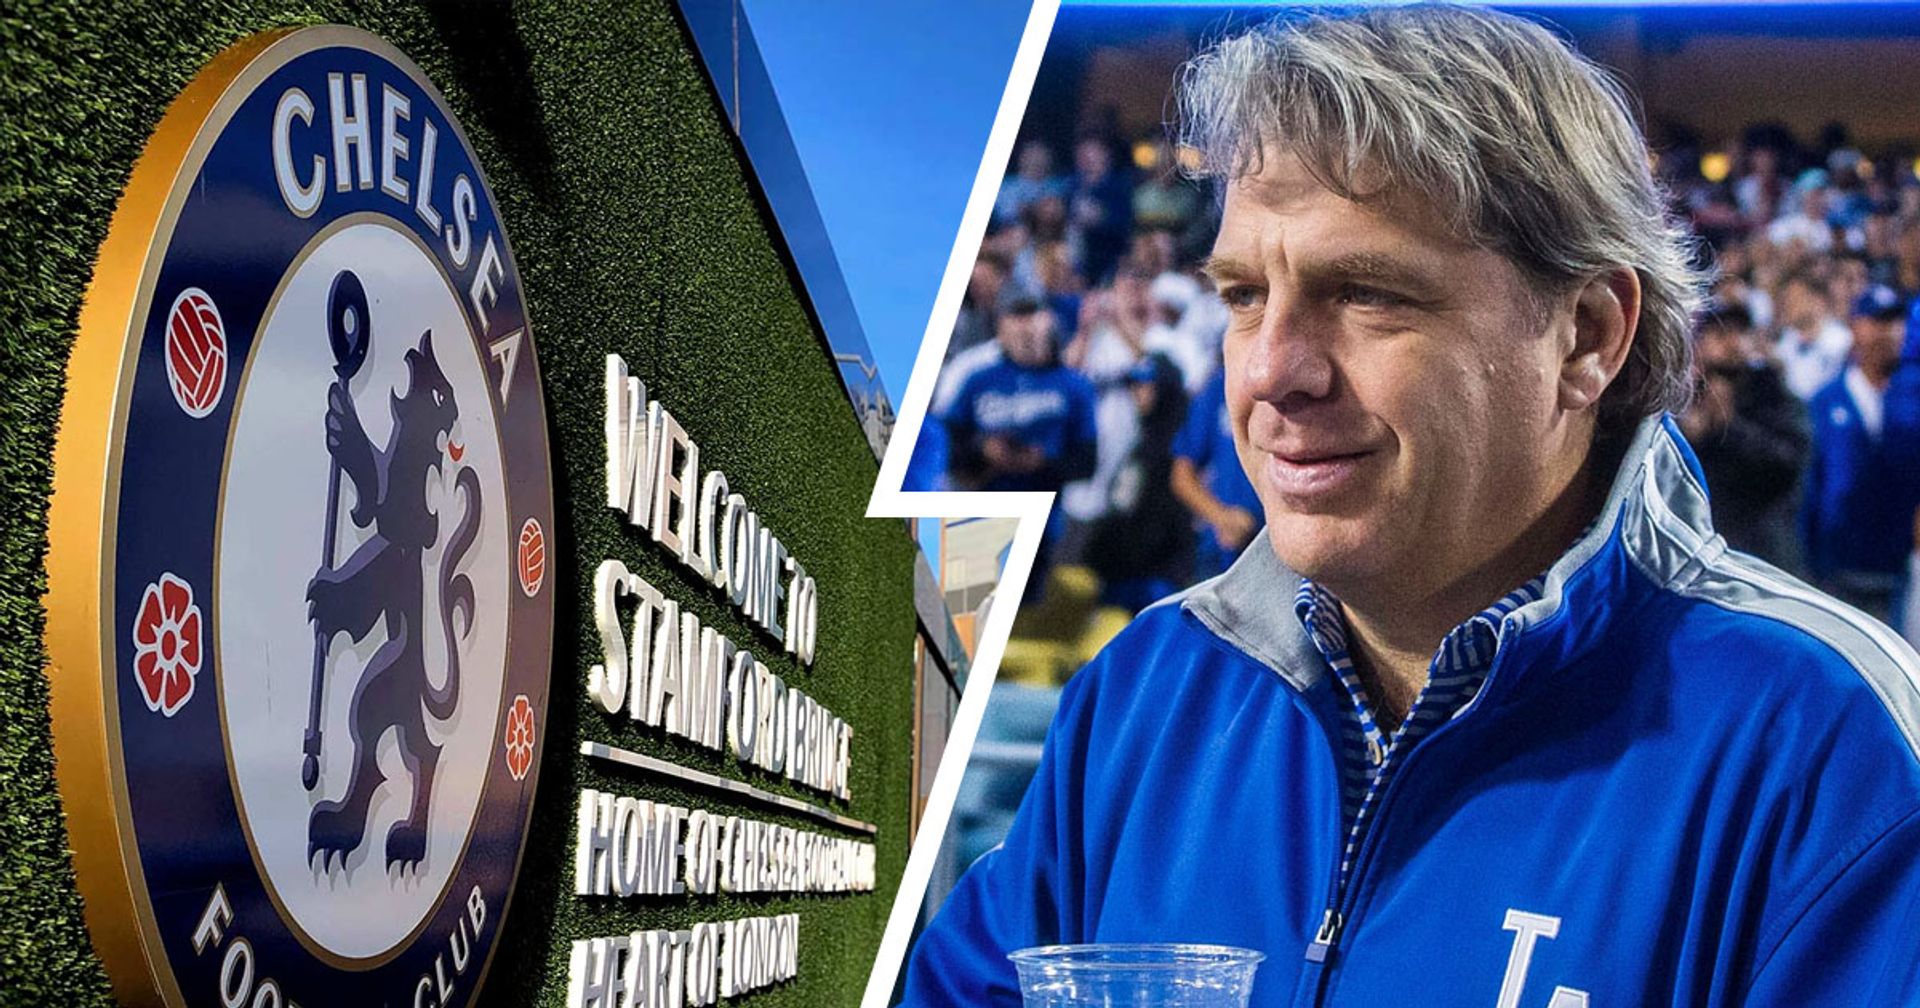 OFFICIAL: Todd Boehly confirmed as Chelsea's new owner